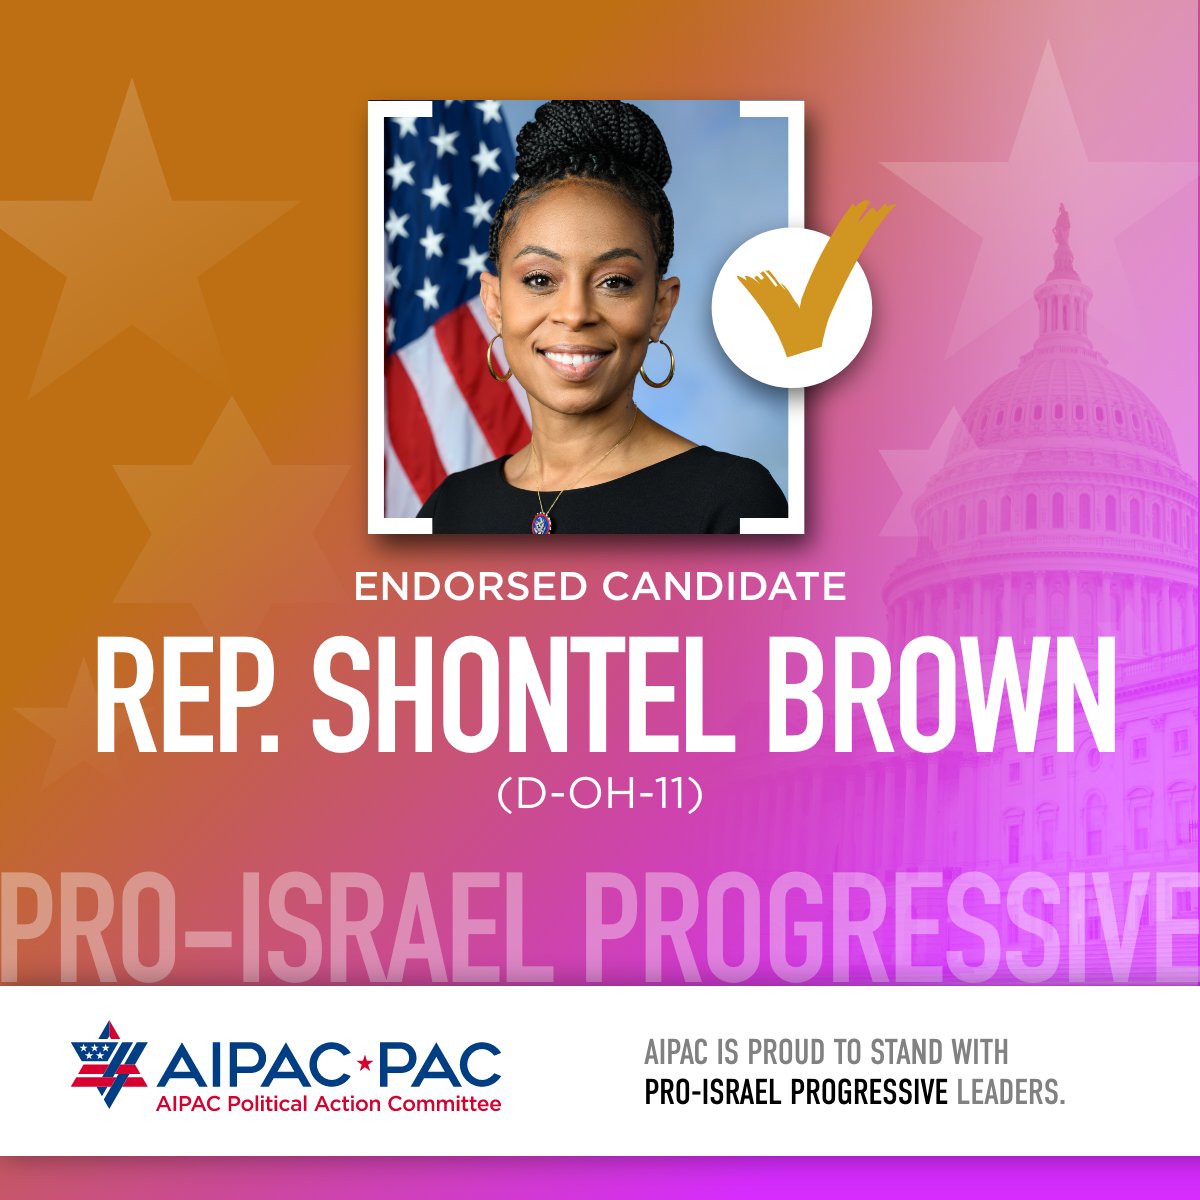 Congratulations to AIPAC-endorsed @RepShontelBrown on your primary election victory! AIPAC is proud to stand with pro-Israel progressive leaders who help strengthen and expand the U.S.-Israel relationship. Being pro-Israel is good policy and good politics.